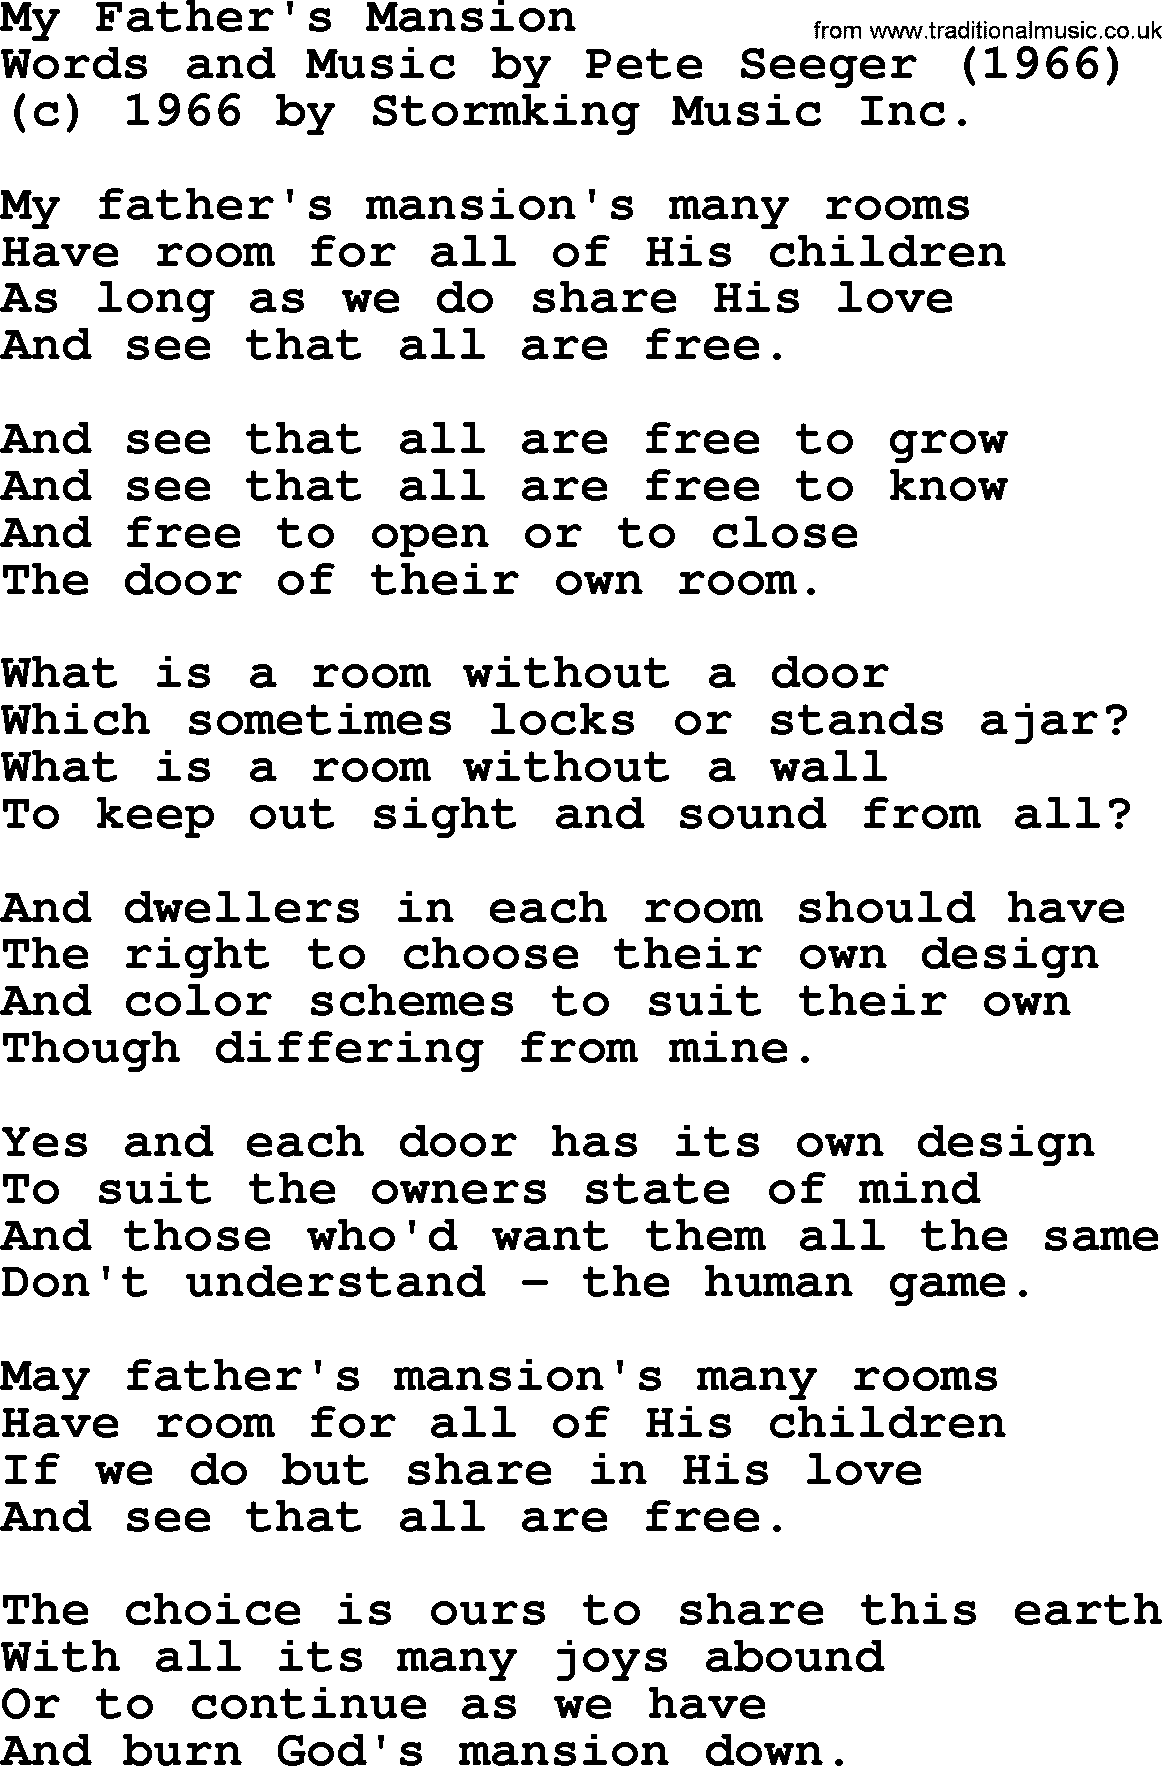 Pete Seeger song My Father's Mansion-Pete-Seeger.txt lyrics